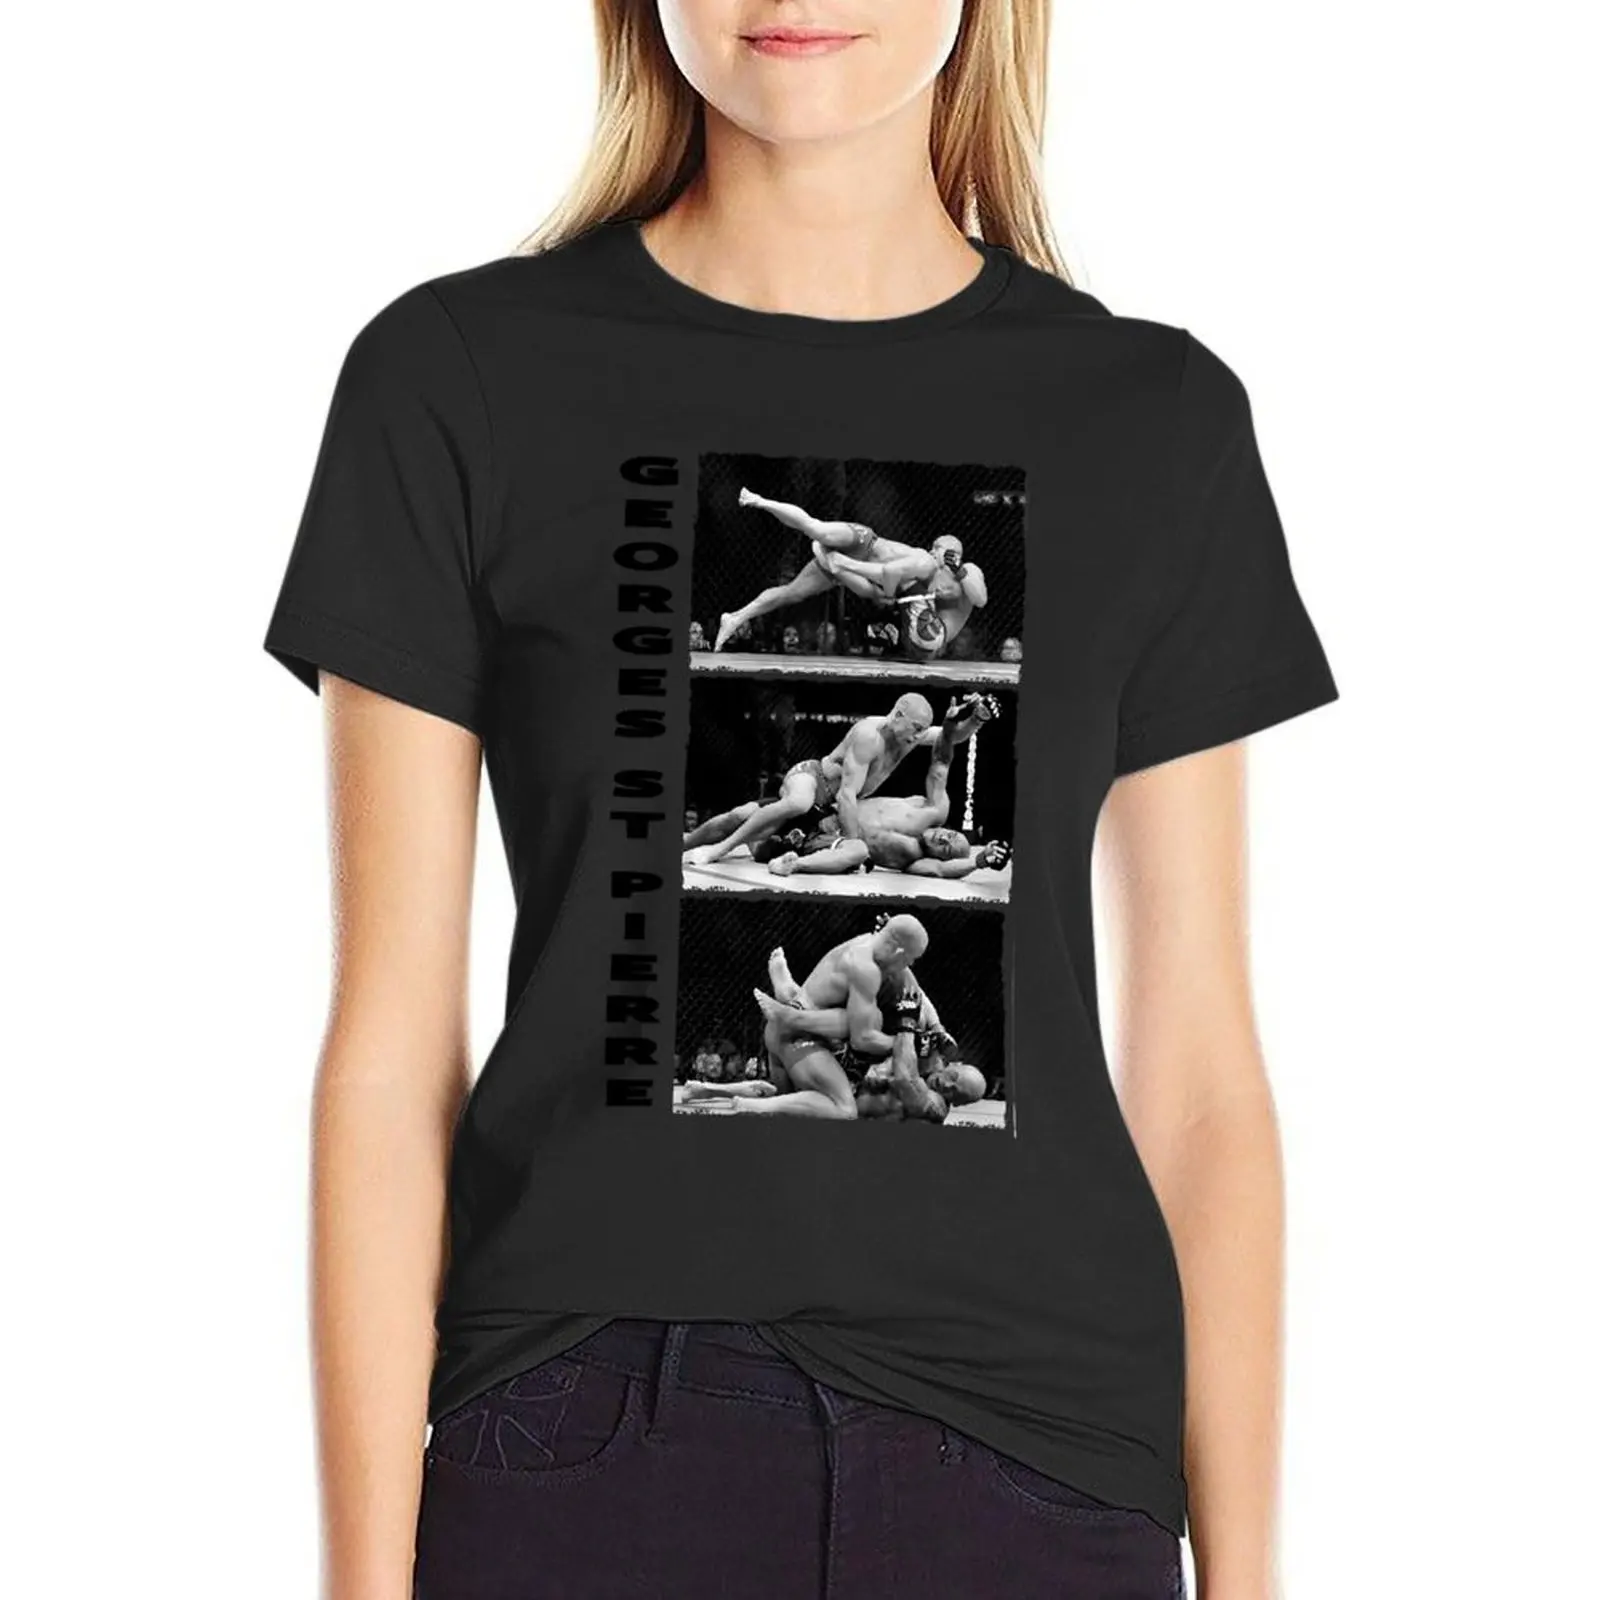 

Georges St-Pierre T-shirt shirts graphic tees aesthetic clothes lady clothes new edition t shirts for Women